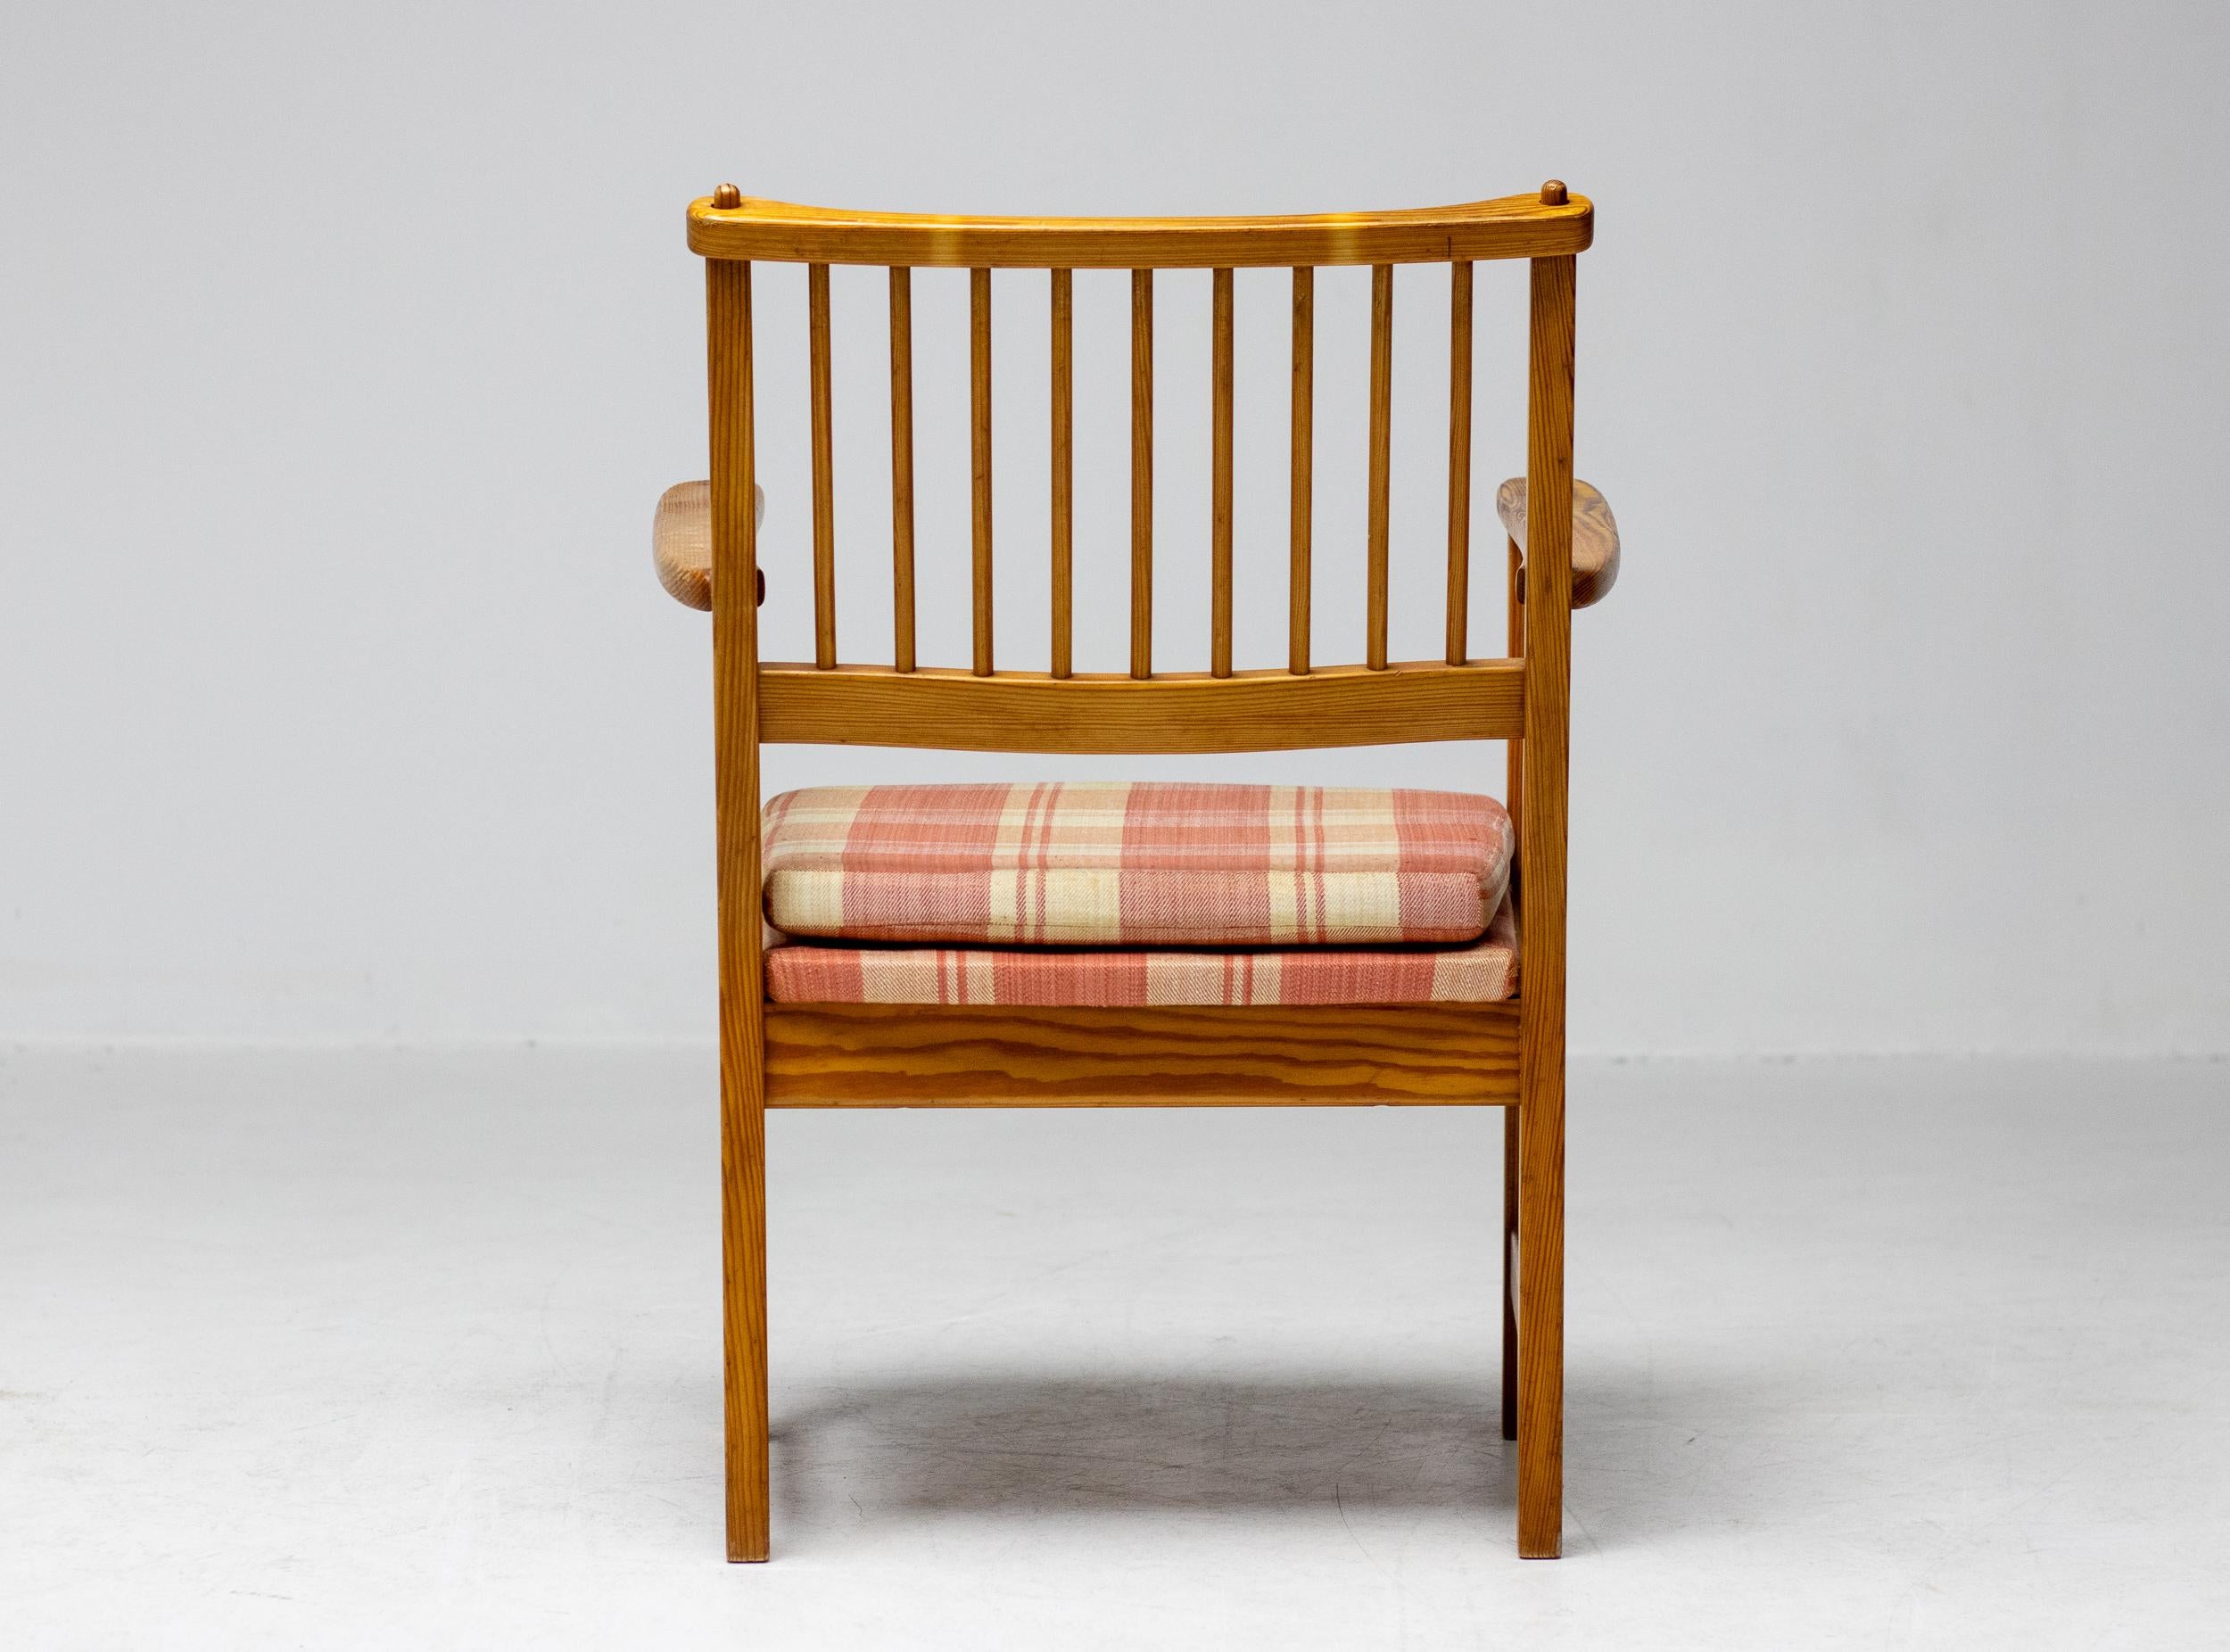 Mid-20th Century Yngve Ekström Oregon Pine Easy Chairs for Swedese, Sweden, 1950s For Sale